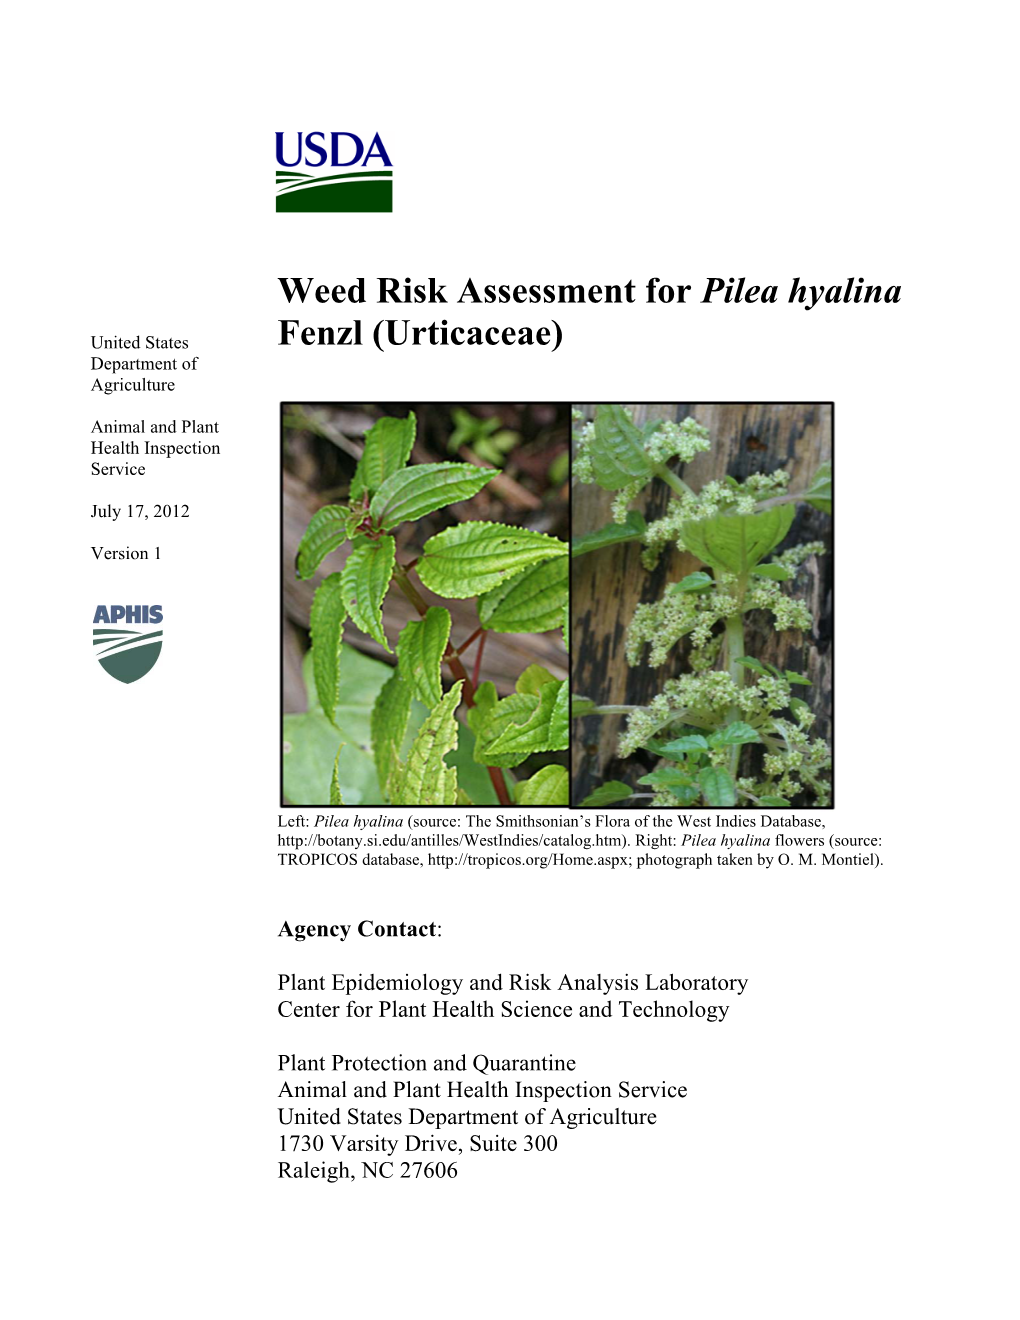 Weed Risk Assessment for Pilea Hyalina Fenzl (Urticaceae)